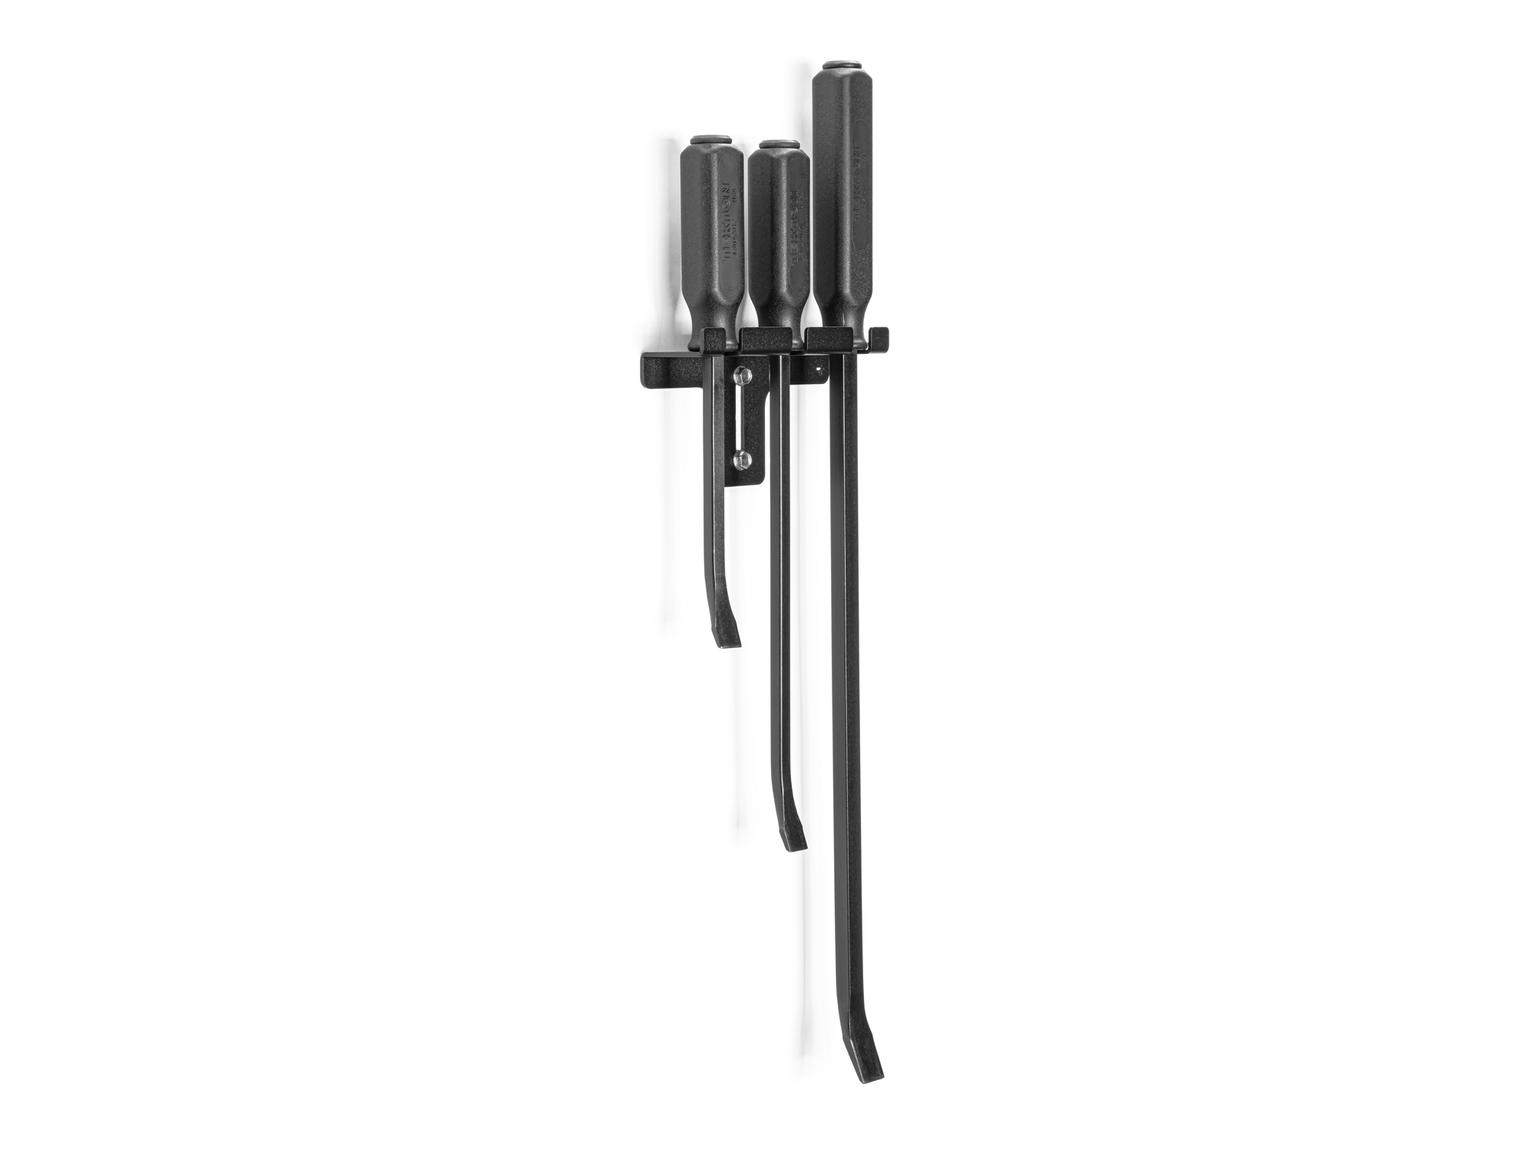 TEKTON LSQ96503-T Angled End Handled Pry Bar Set with Wall Hanger, 3-Piece (12, 17, 25 in.)